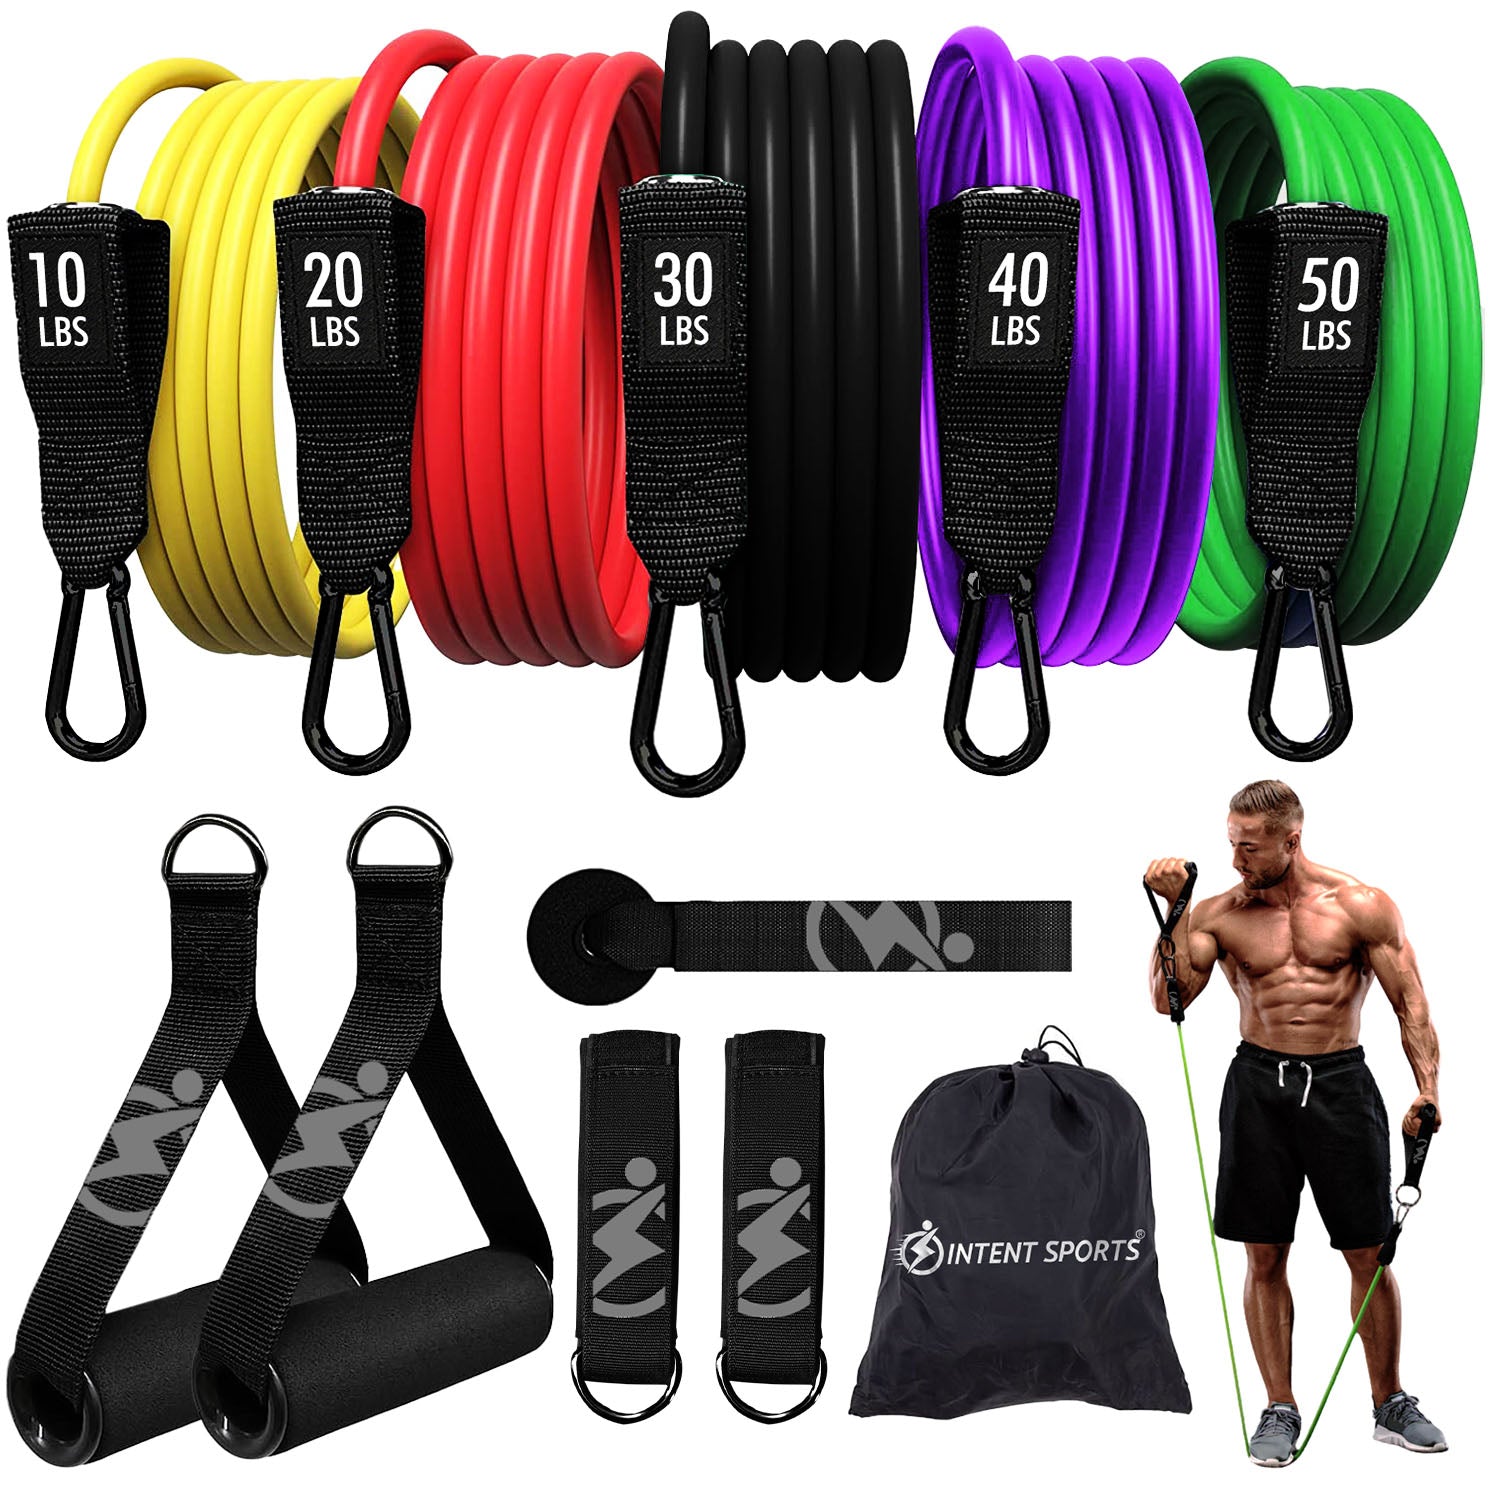 Resistance Bands Set – Exercise Bands with Handles, Door Anchor, Legs Ankle Straps, Carry Bag for Fitness, Muscle Training, Home Workout, Physical Therapy, Shape Body for Men and Women